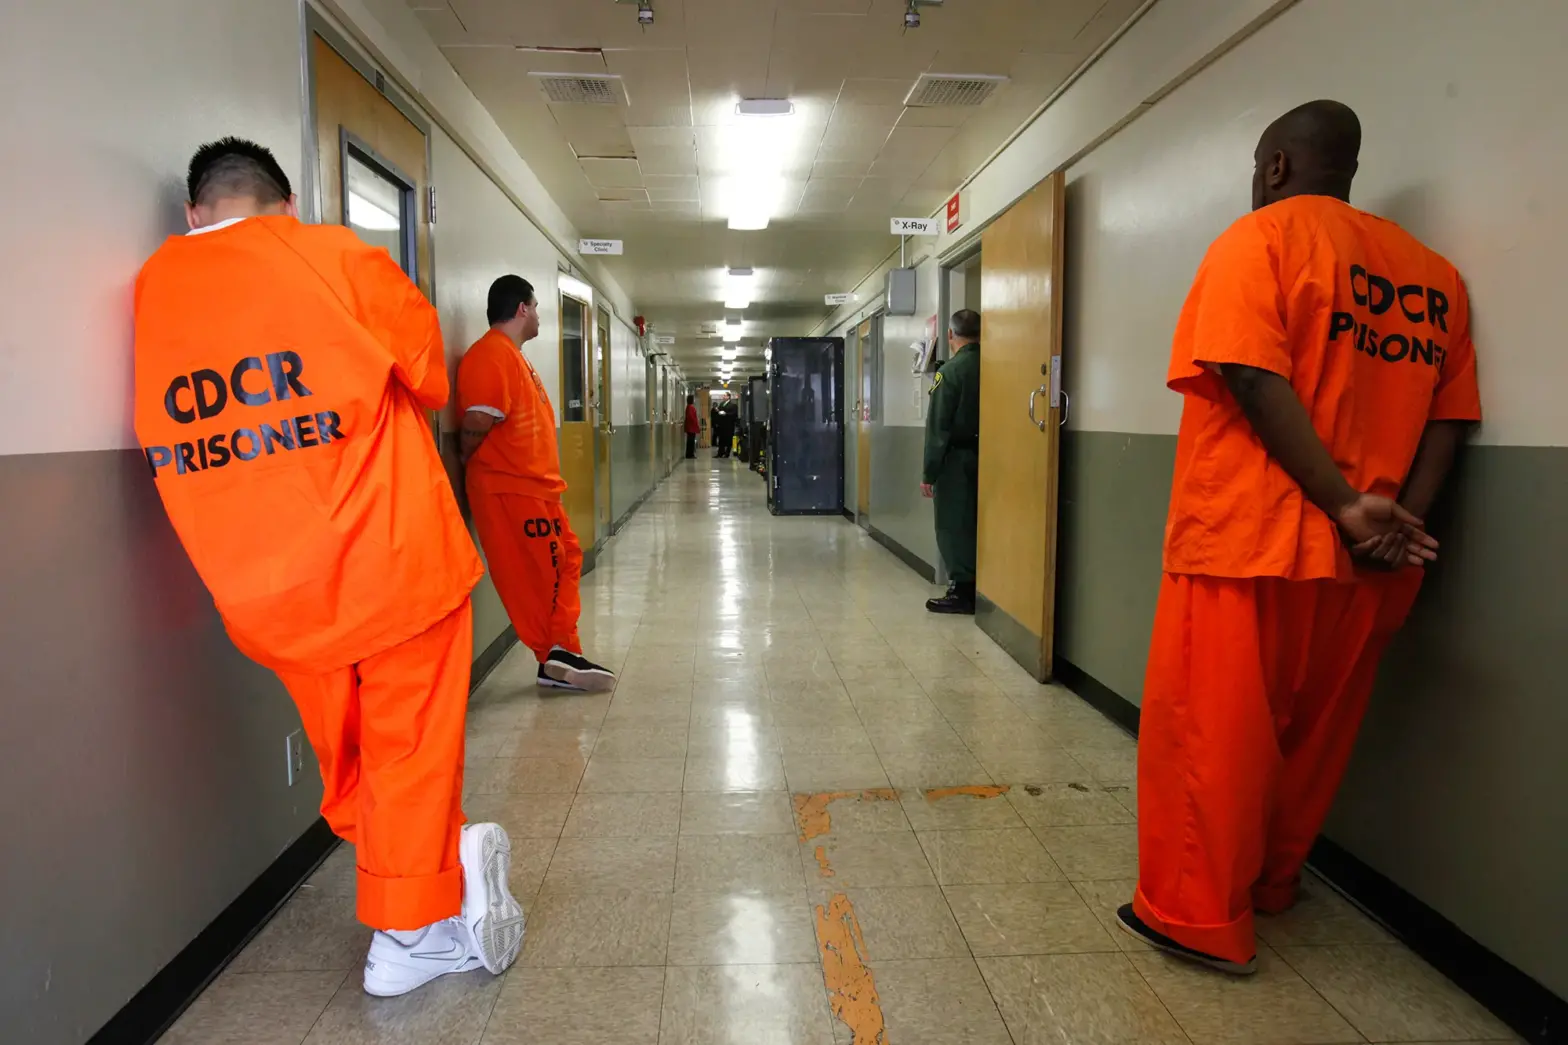 Prison Hallway Photo, Inmates Looking Away from Camera